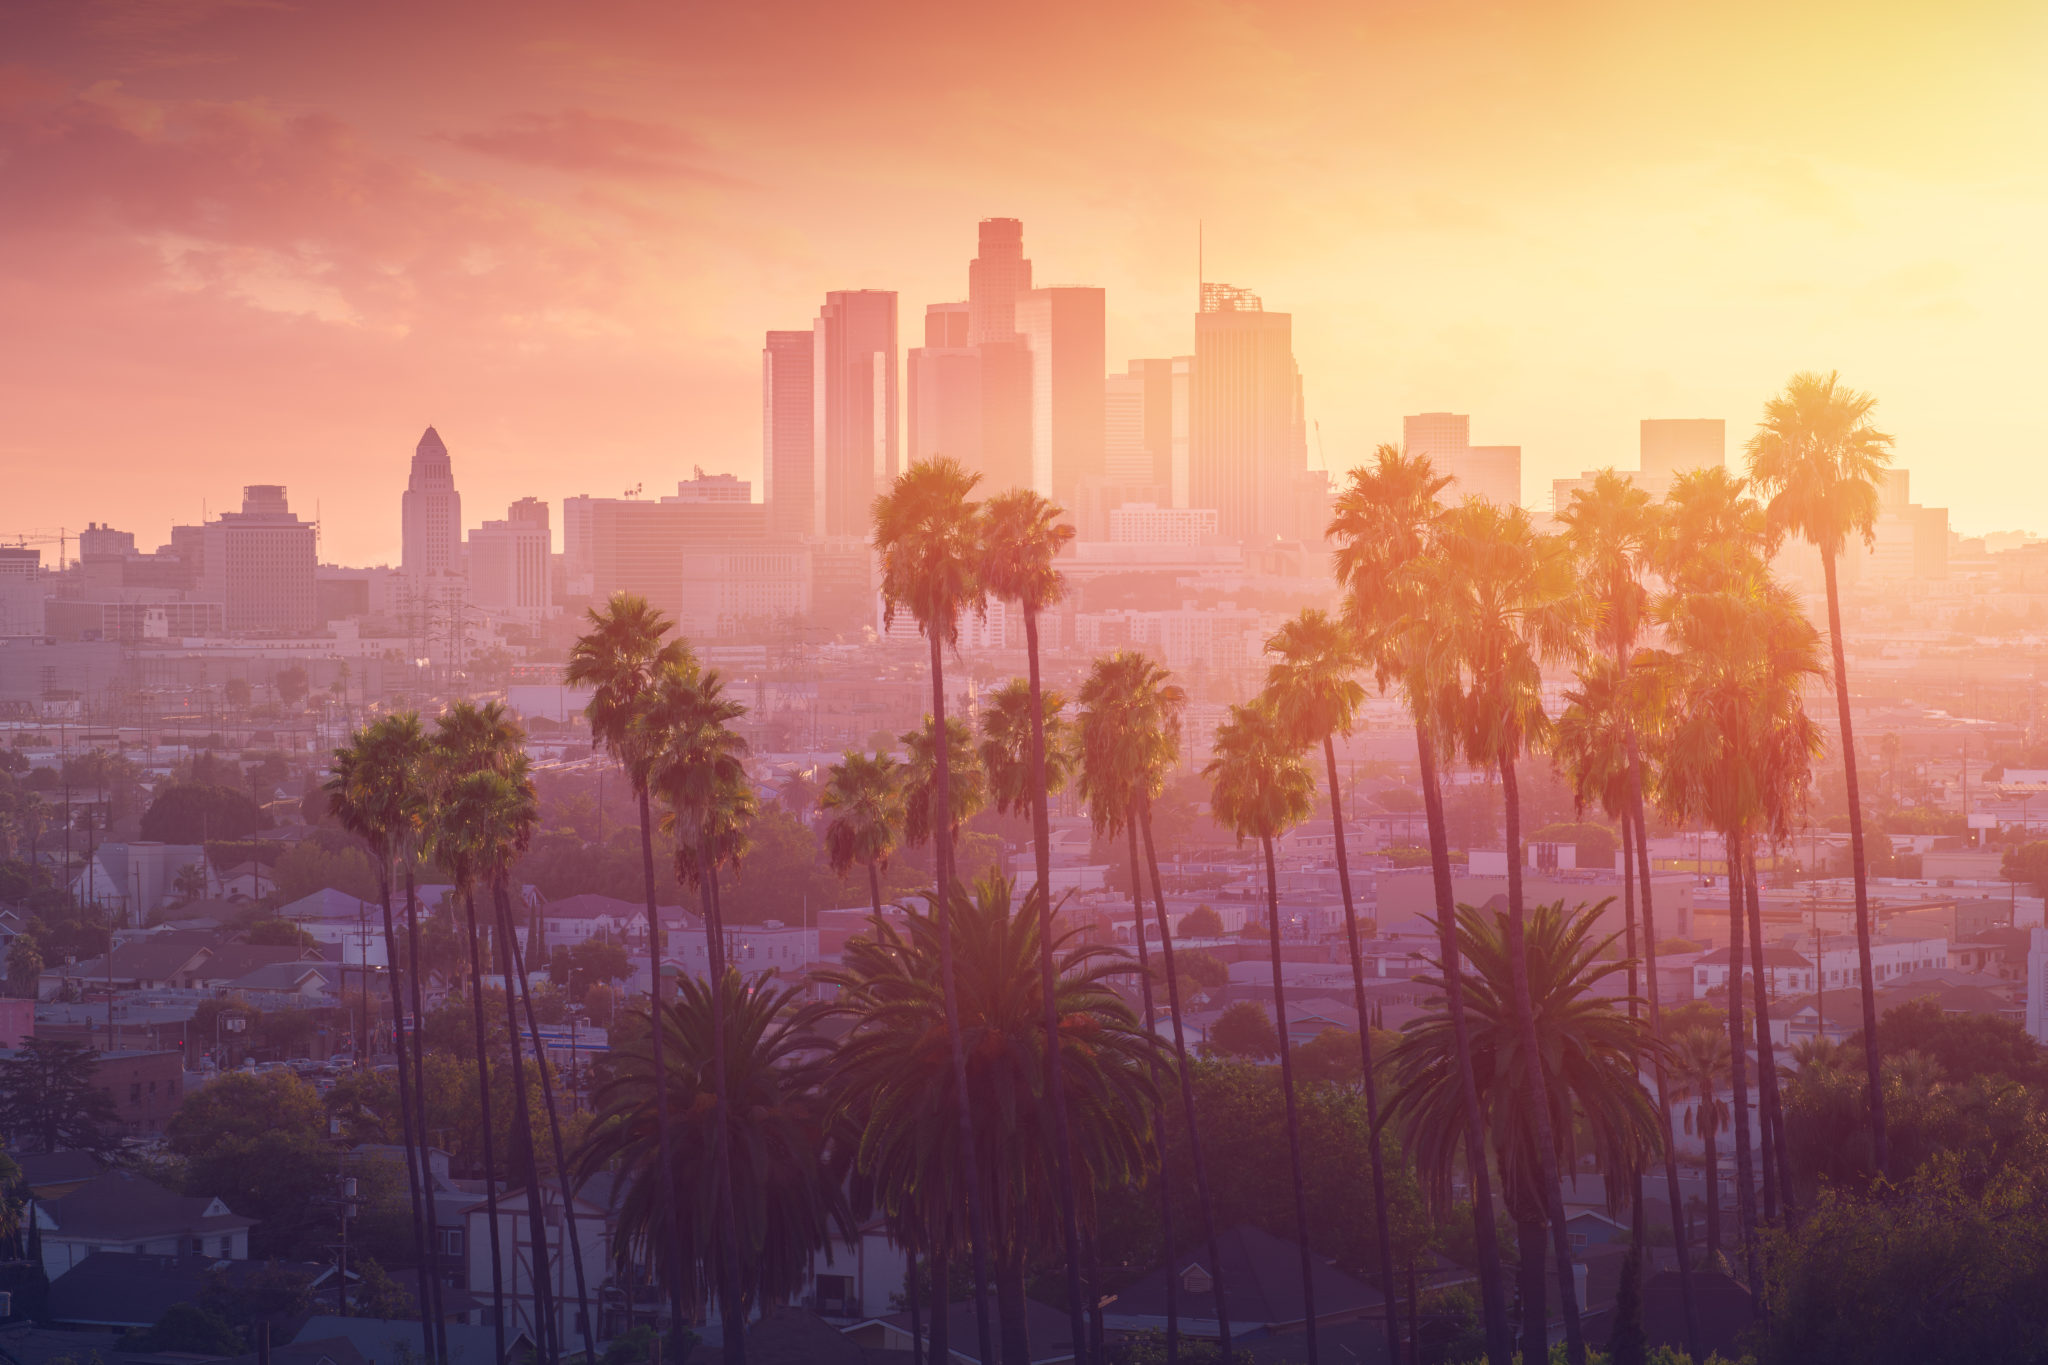 Los Angeles hot sunset view with palm tree and smog over downtown in background.